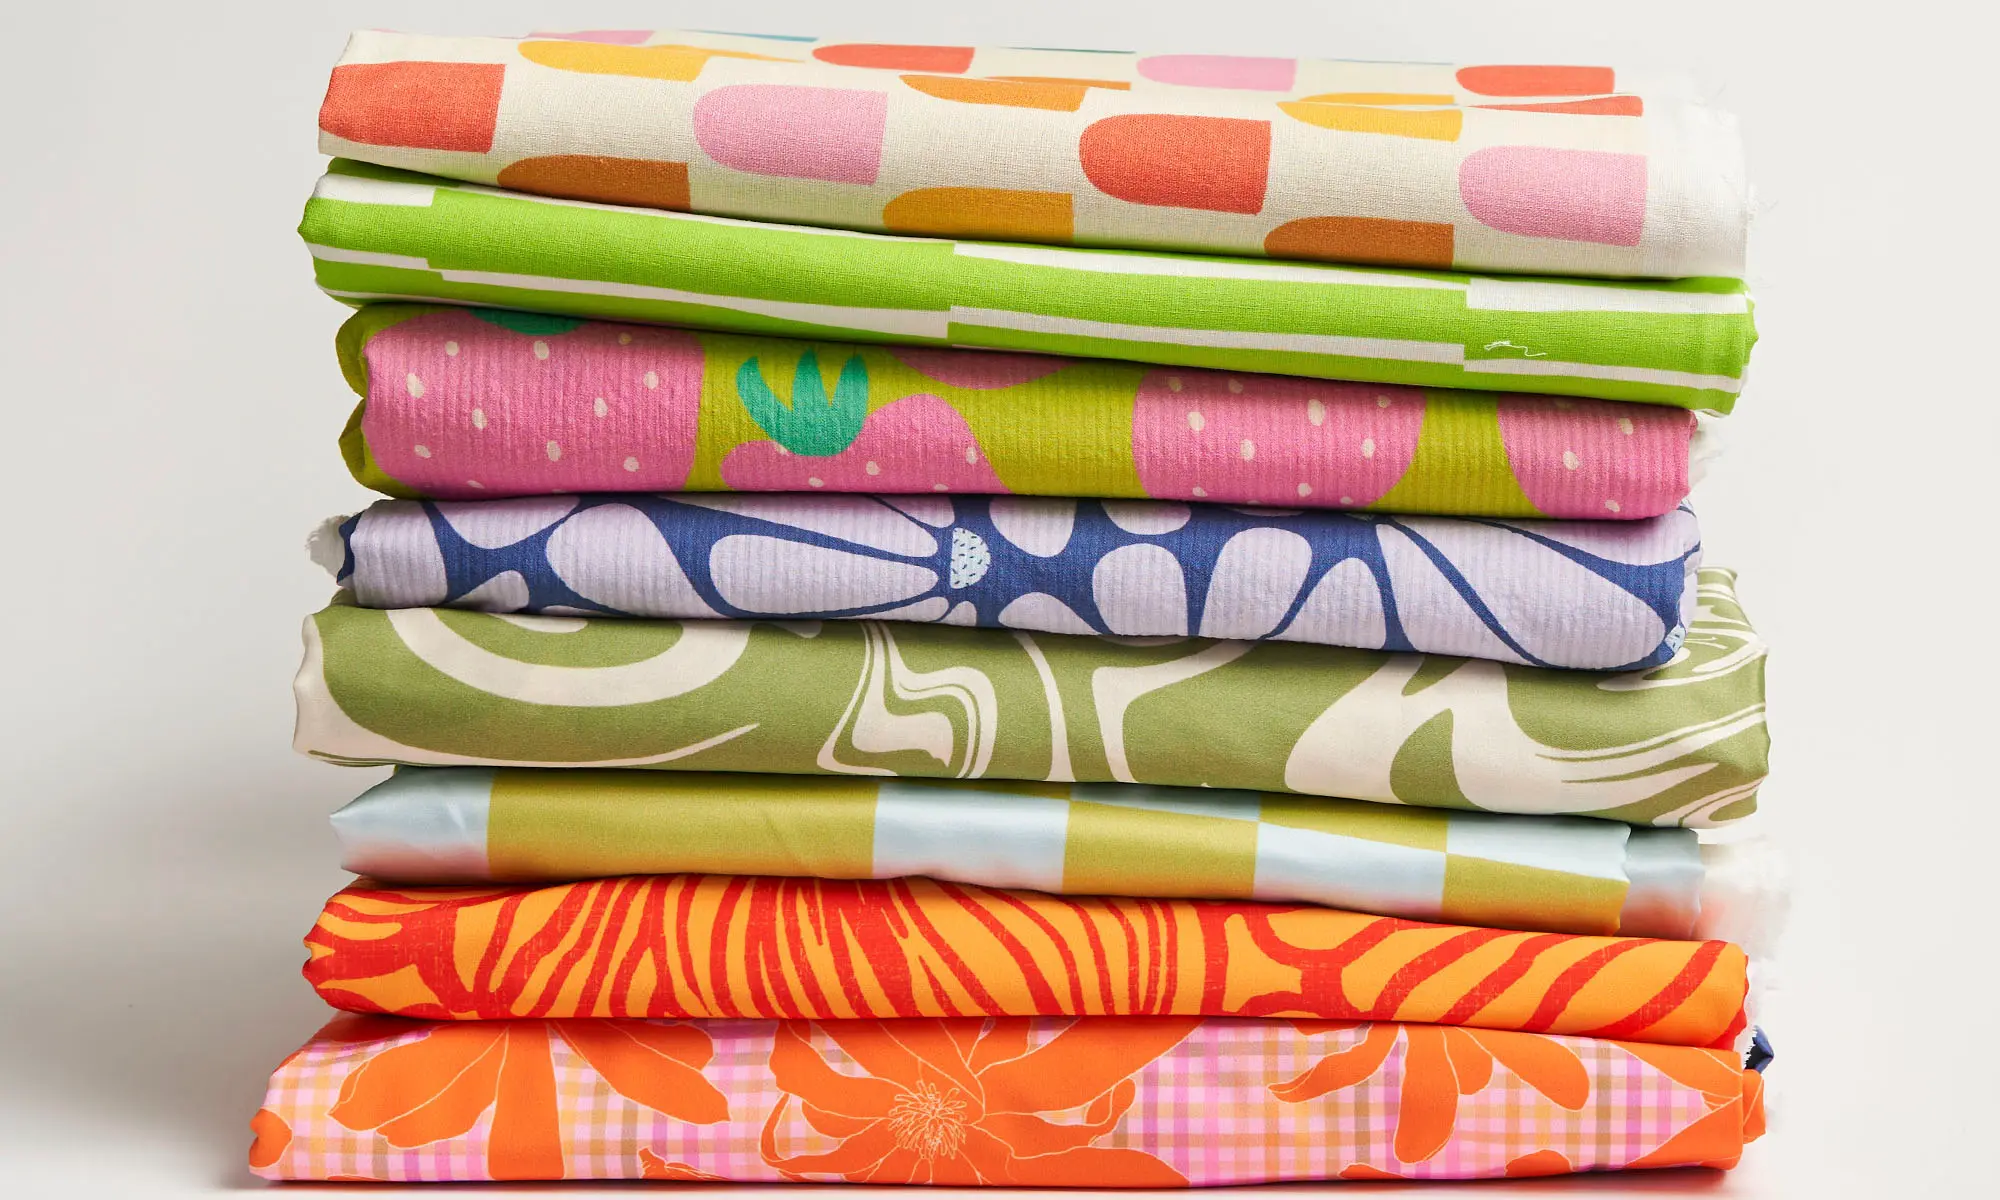 Stack of colorfully printed summer apparel fabrics.